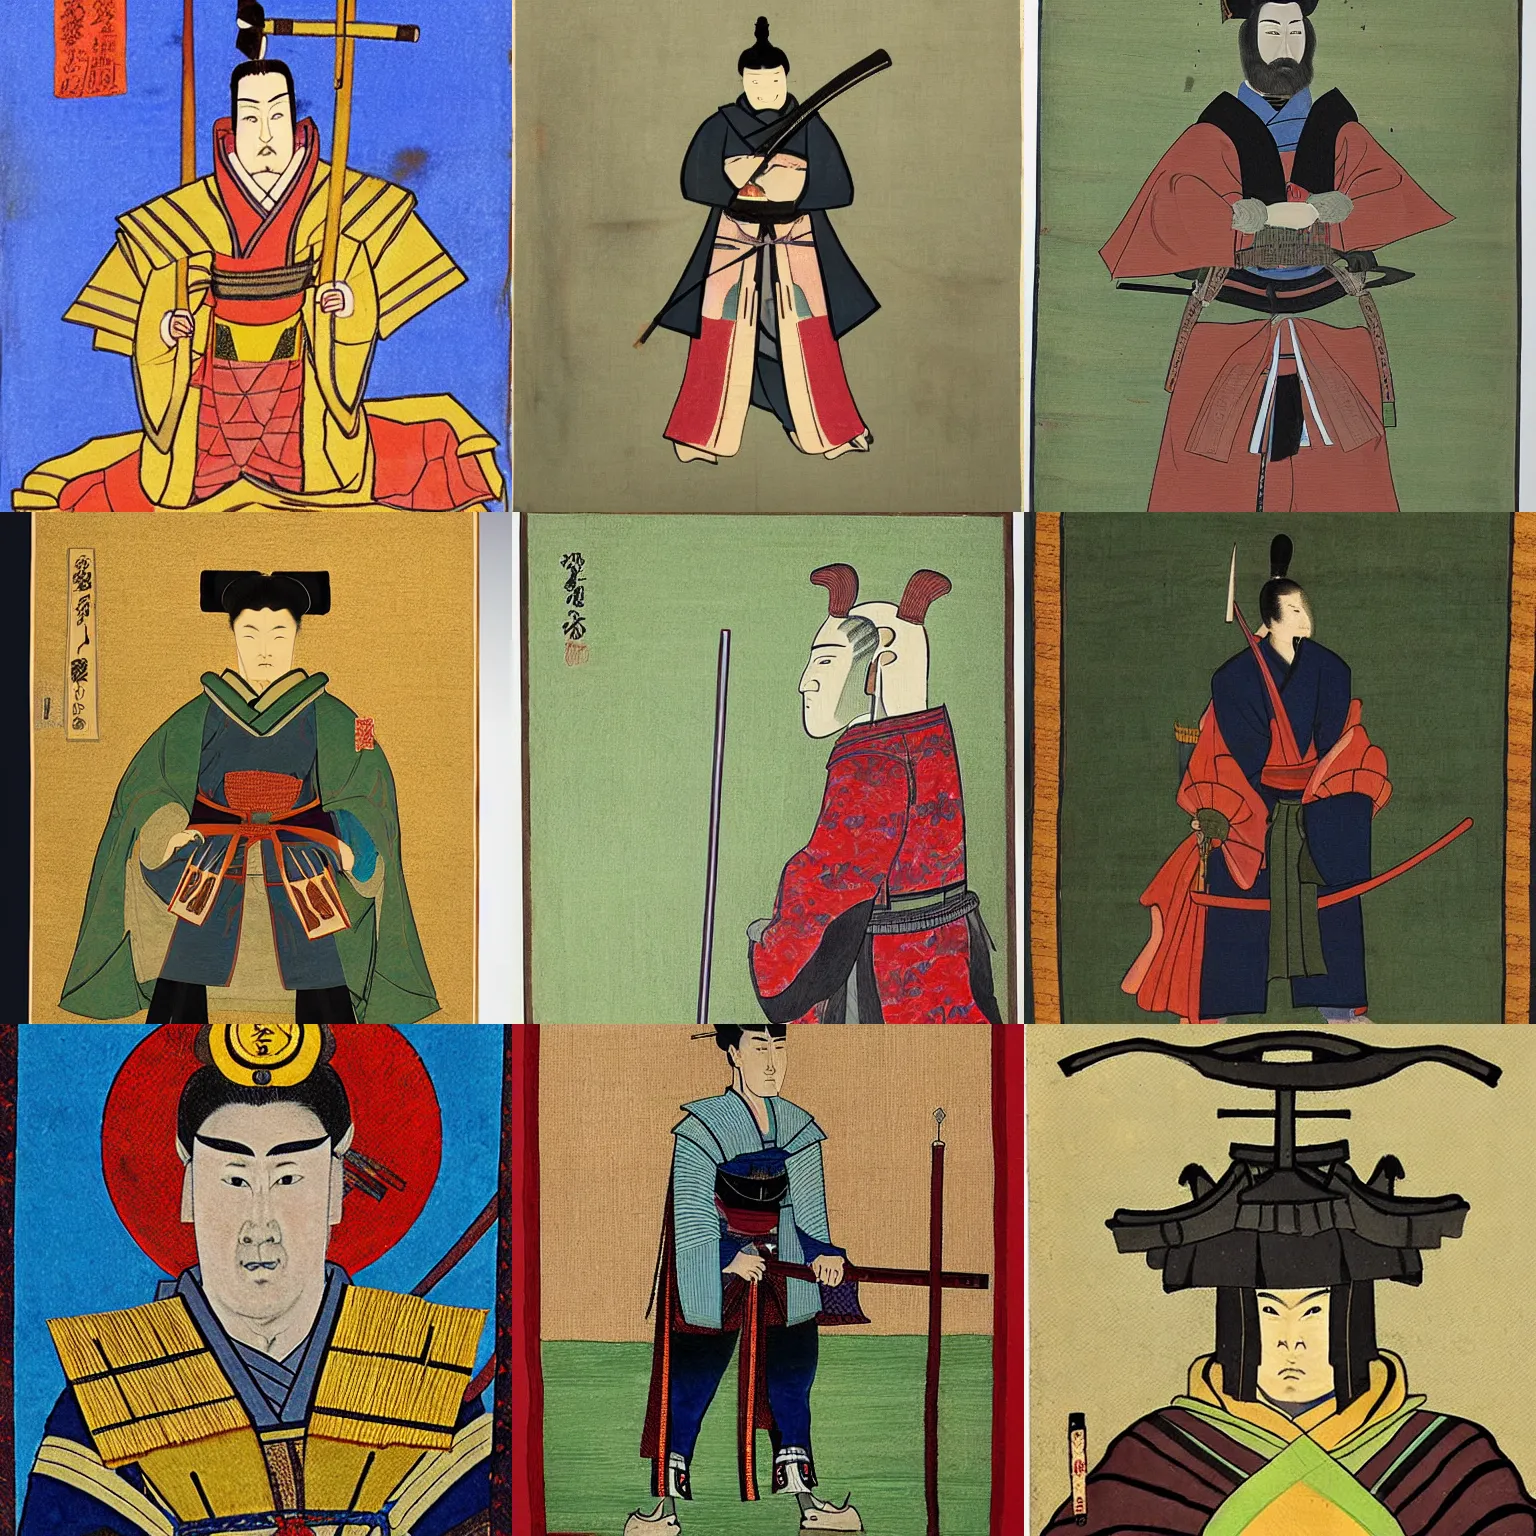 Prompt: a Tempera painting of a medieval Japanese samurai